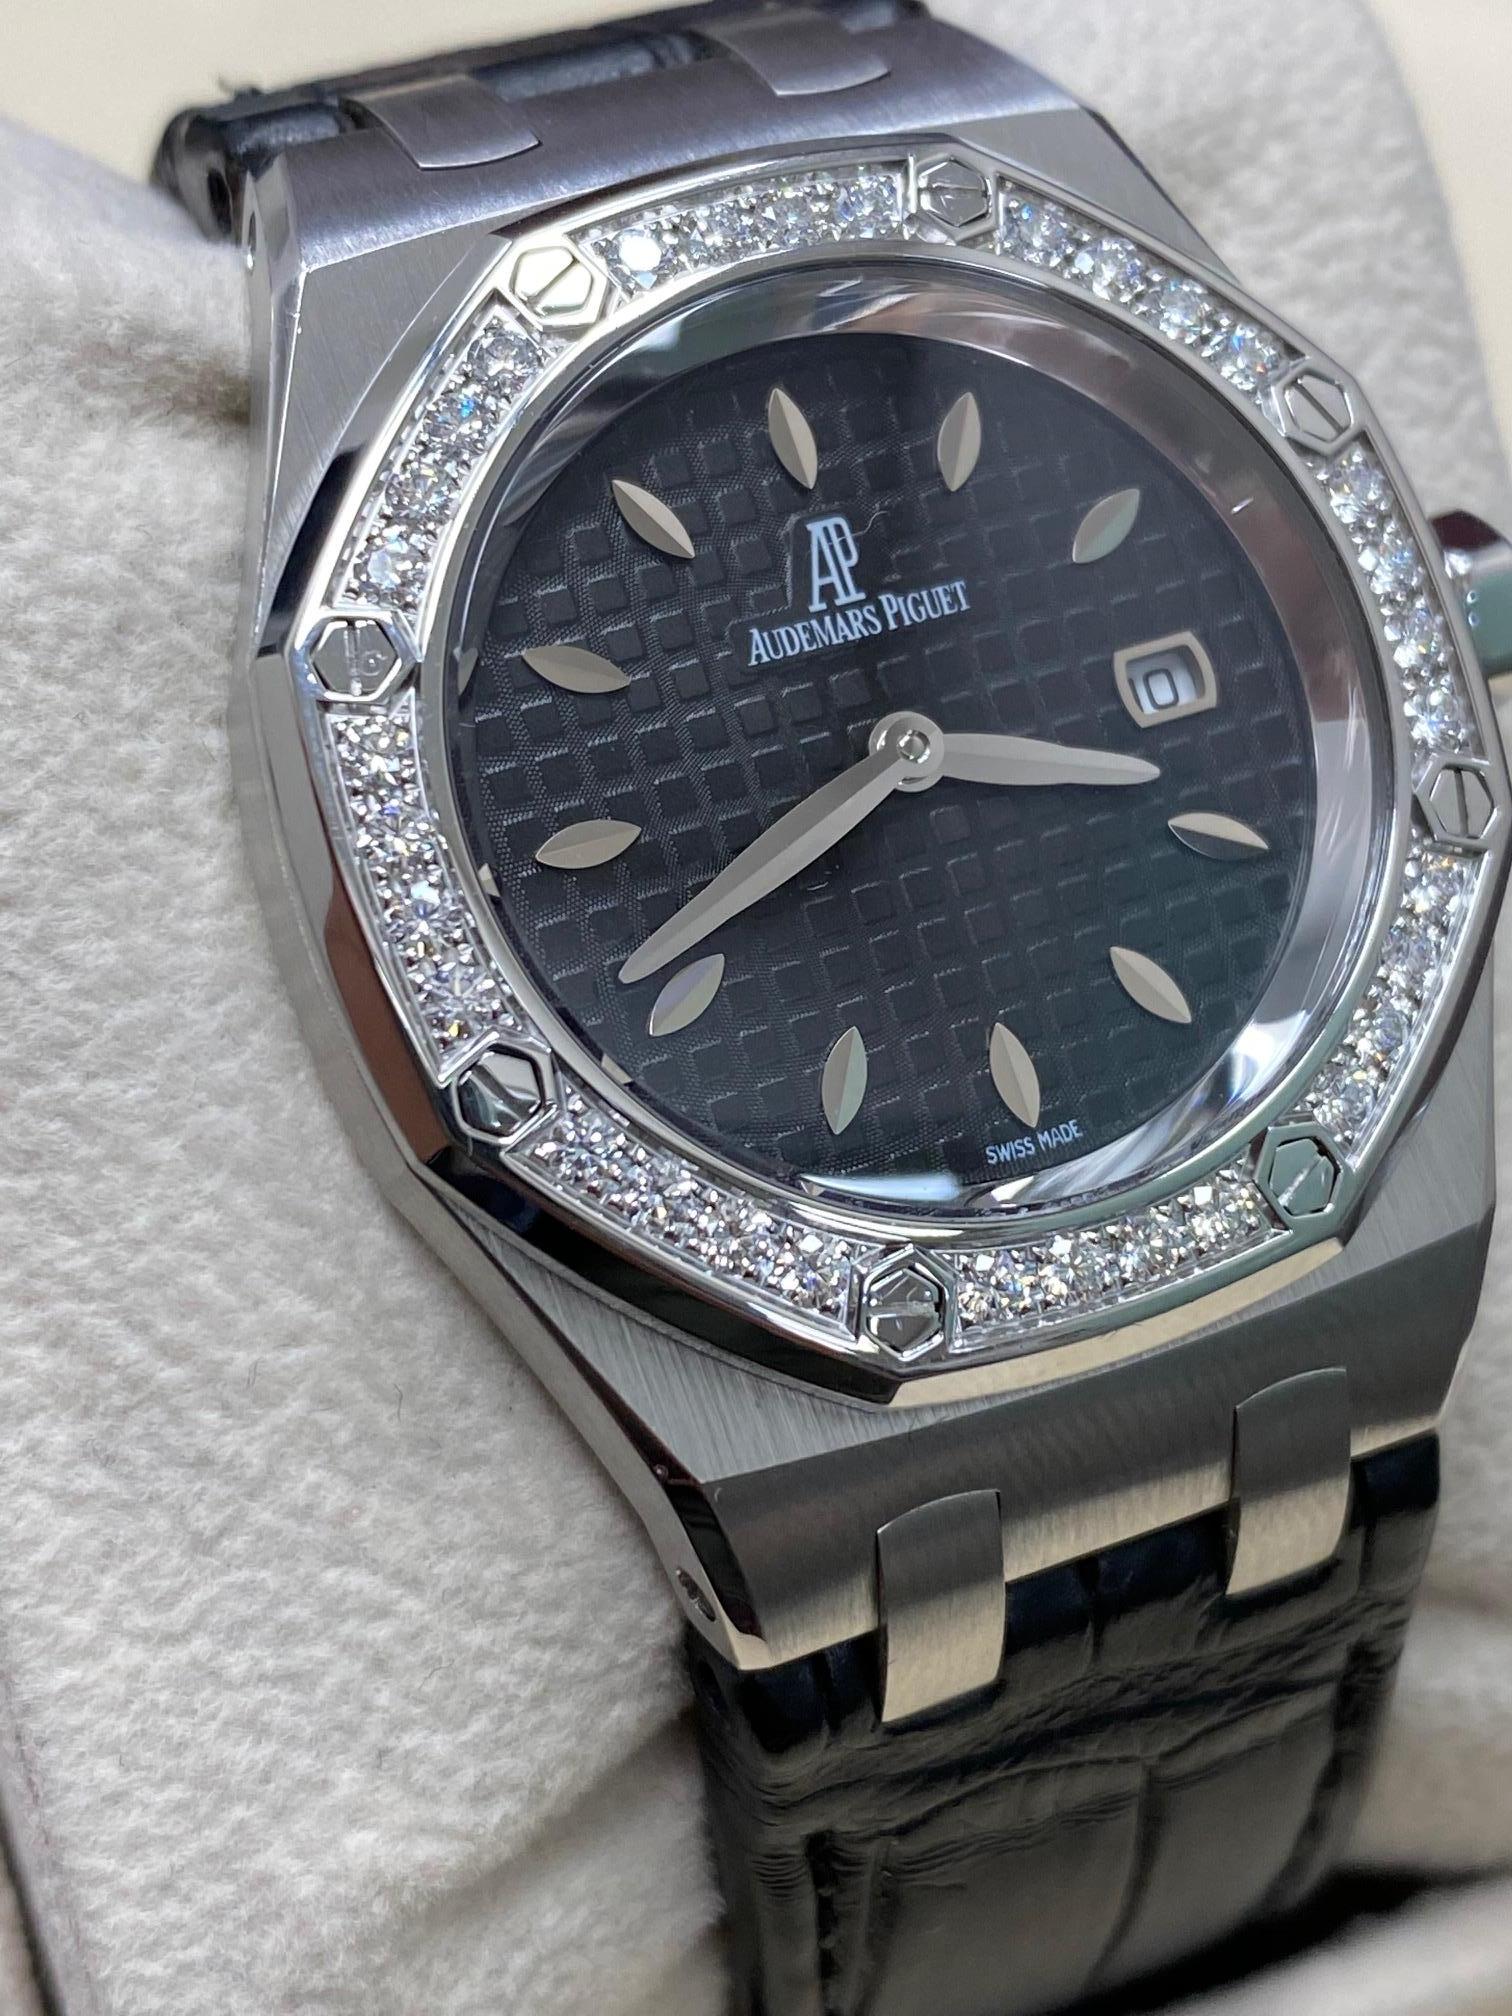 Style Number: 67651ST.ZZ.1261ST.01
 
Model: Royal Oak
 
Case Material: Stainless Steel
 
Band: Leather 
 
Bezel:  Original Factory Diamond Bezel 0.71ctw 
 
Dial: Black
 
Face: Sapphire Crystal
 
Case Size: 33mm

Retail: $17,700